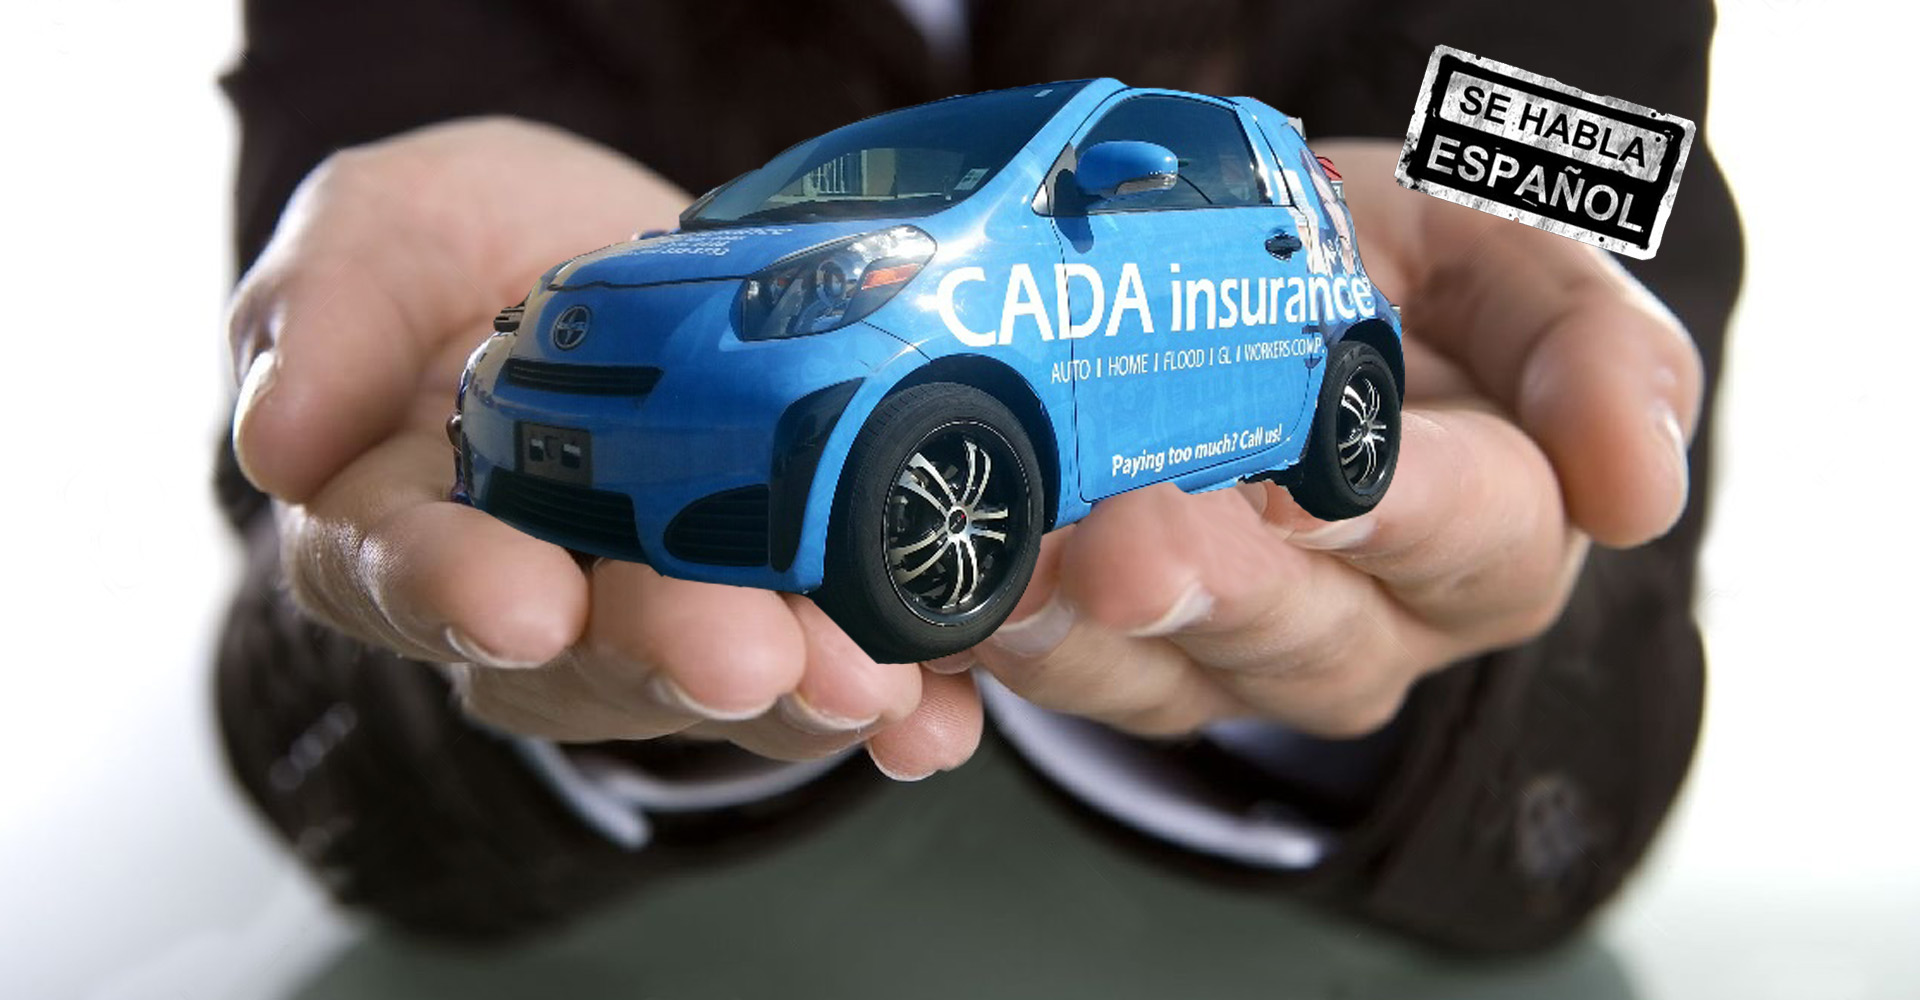 CADA Insurance Auto Insurance License Plates Titles Transfers General Liability Group